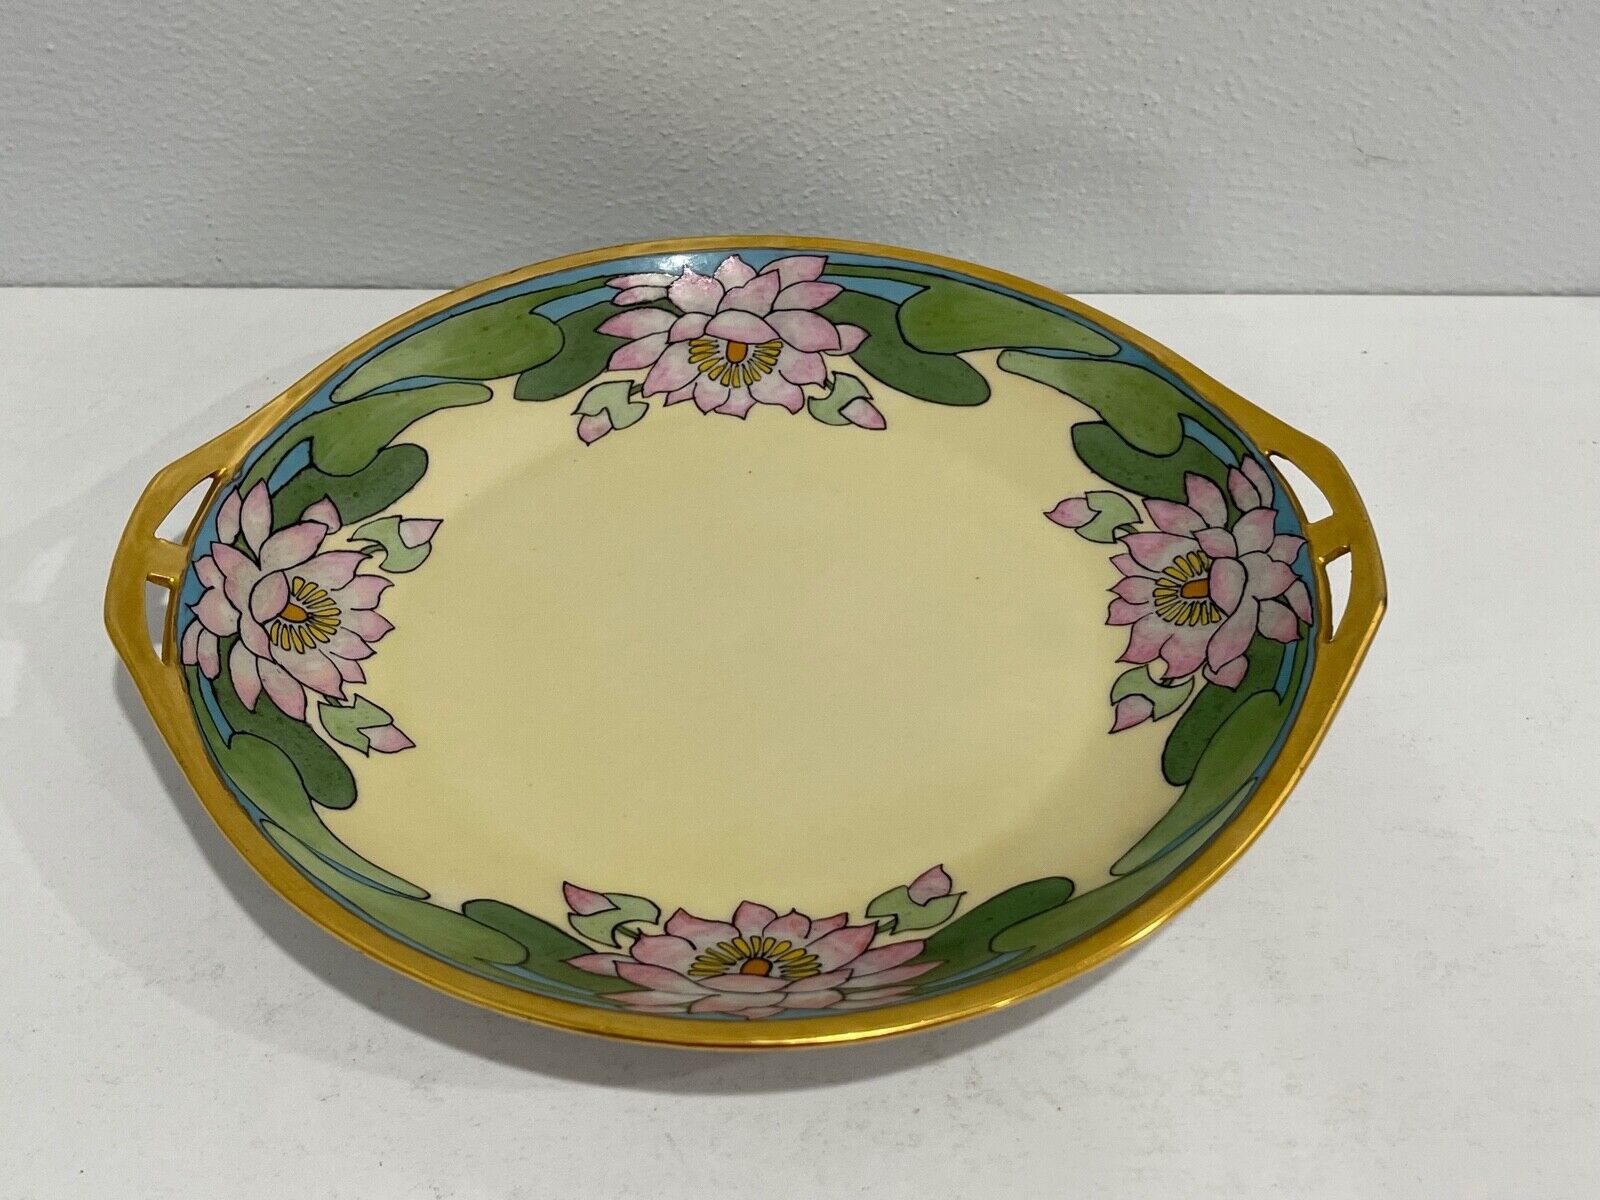 Antique 1924 Deco Arzberg Porcelain Cookie Cake Plate Tray Painted Lotus Flower